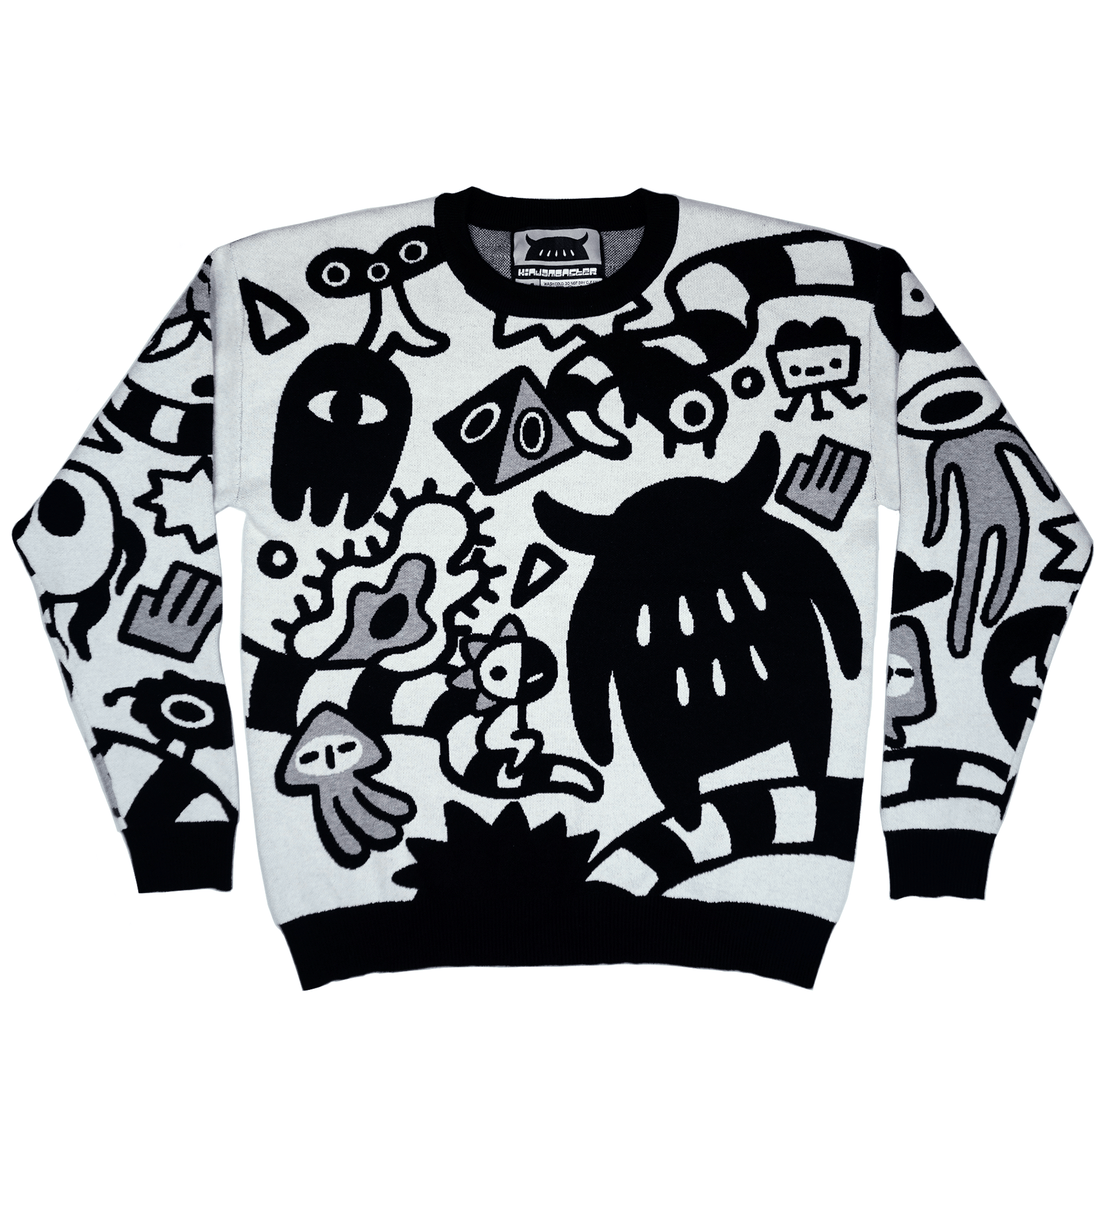 Sweater: Monsters